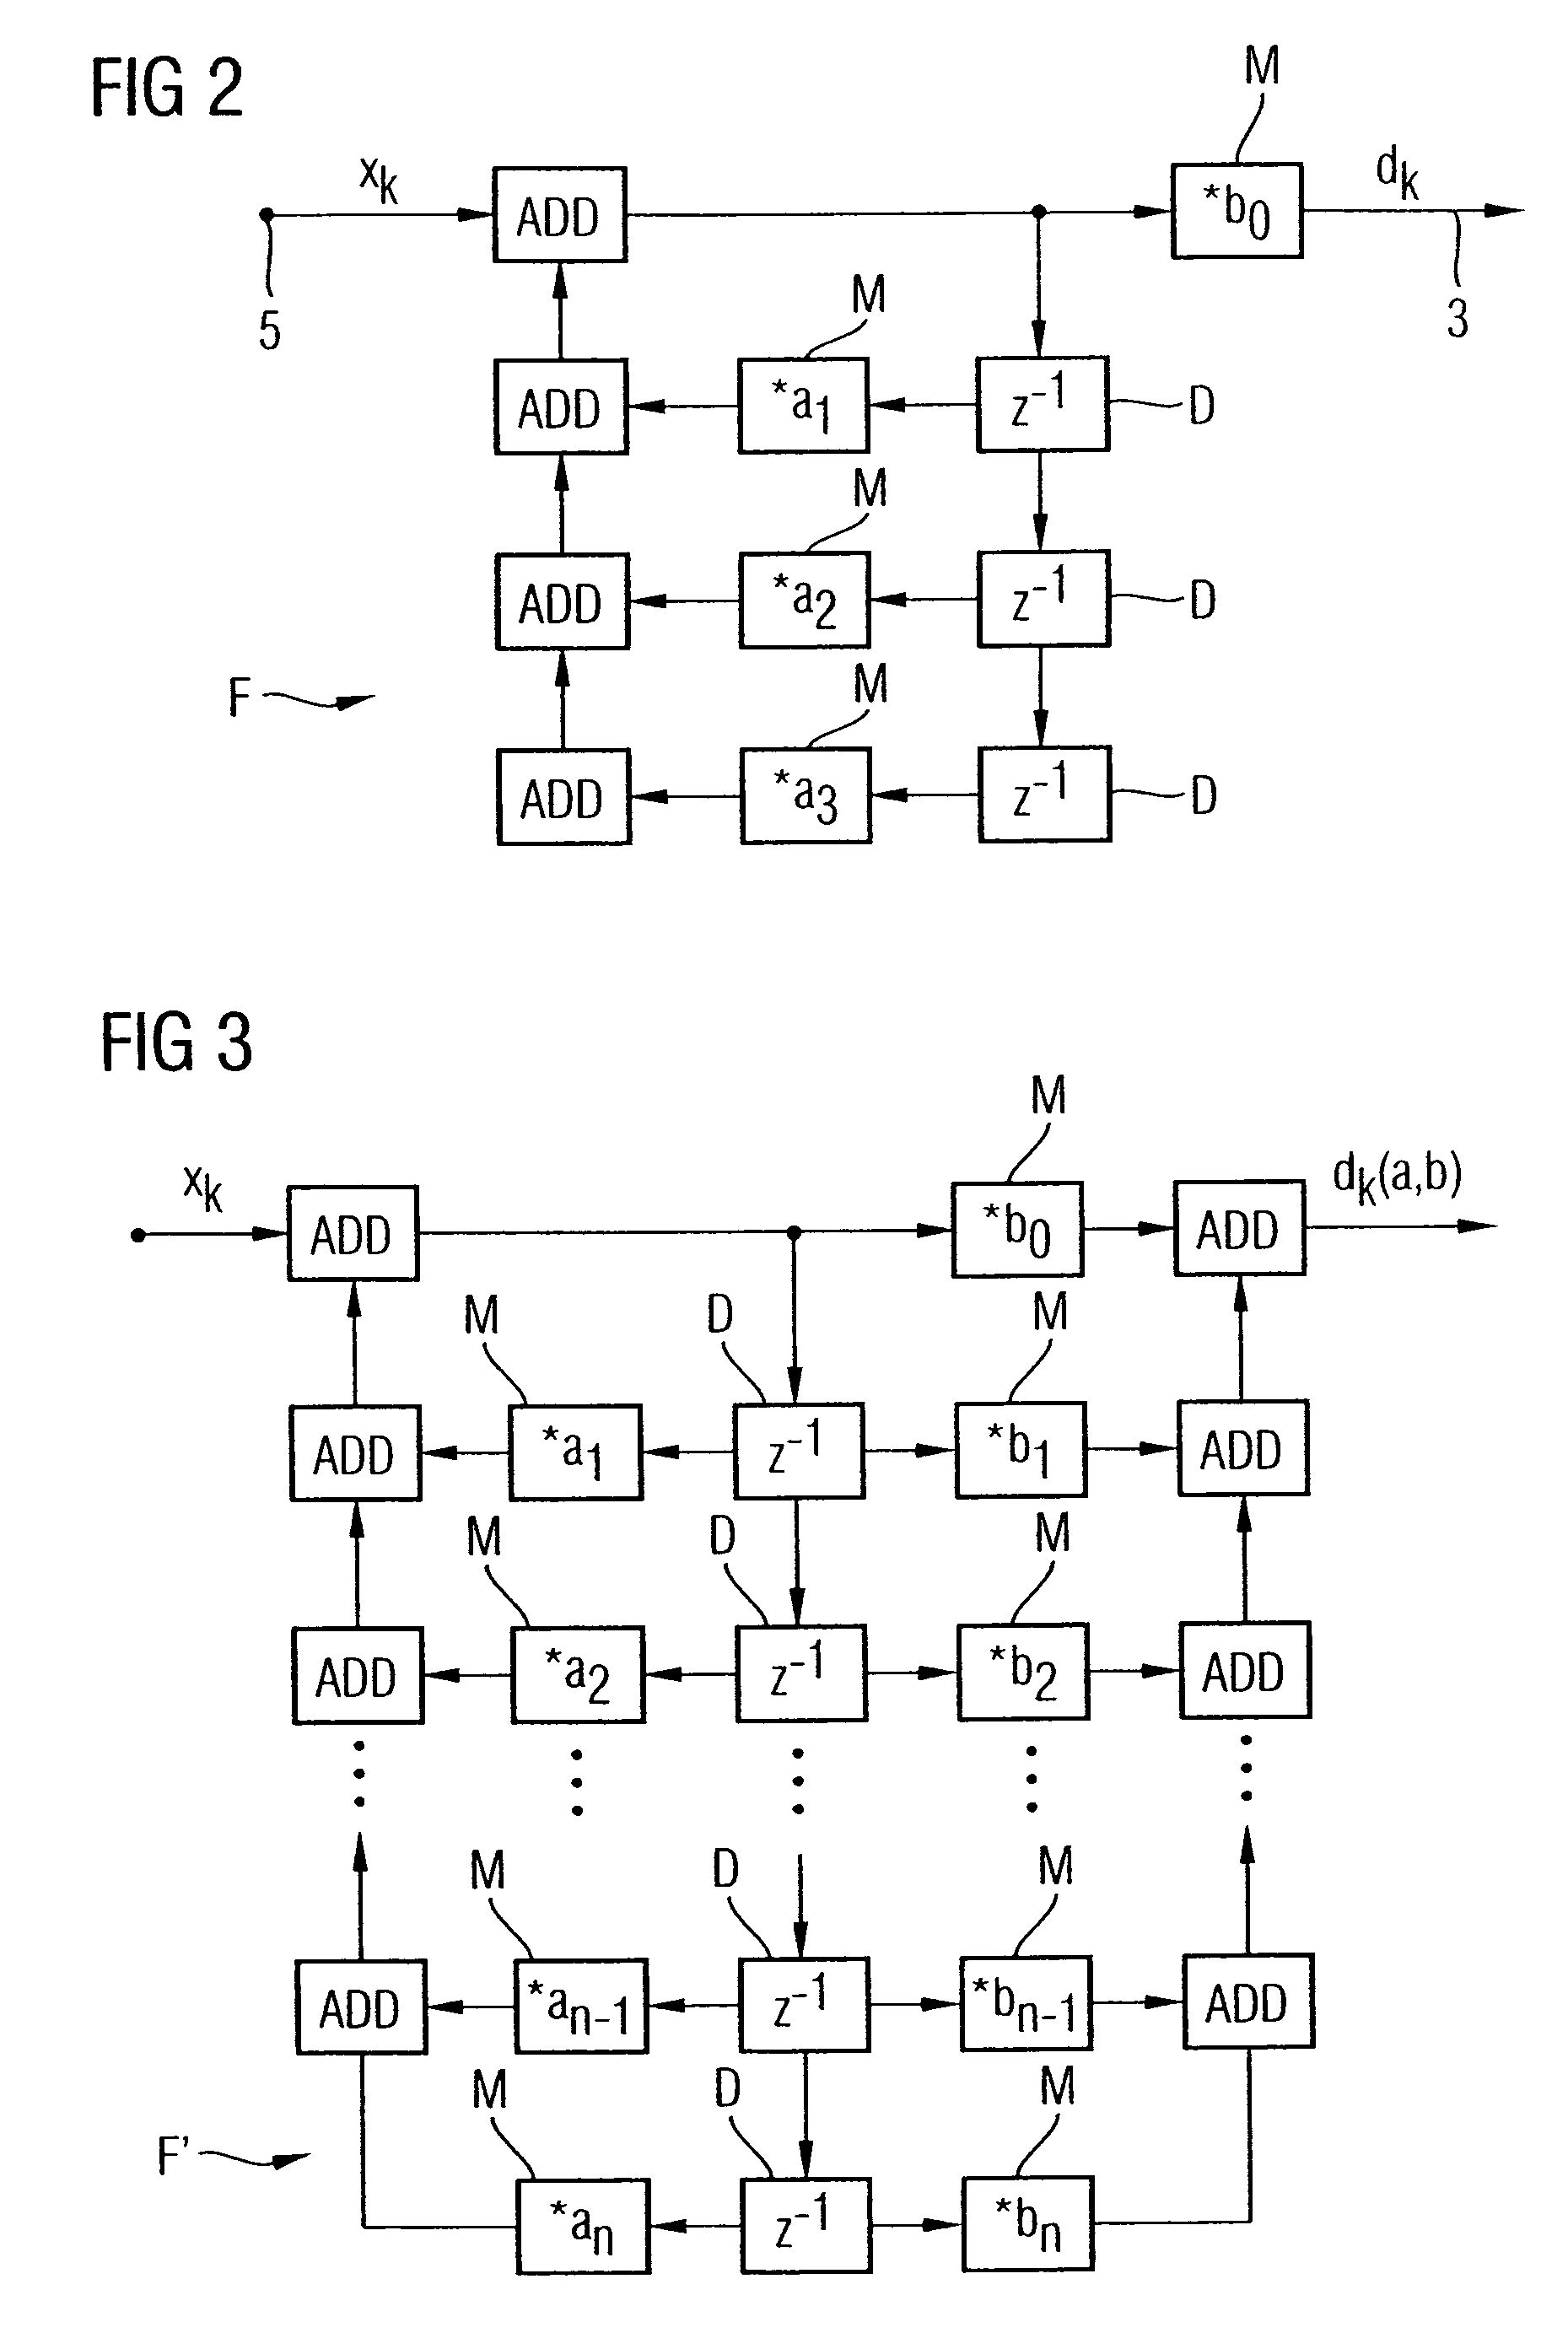 Method and apparatus for channel estimation in radio systems by MMSE-based recursive filtering